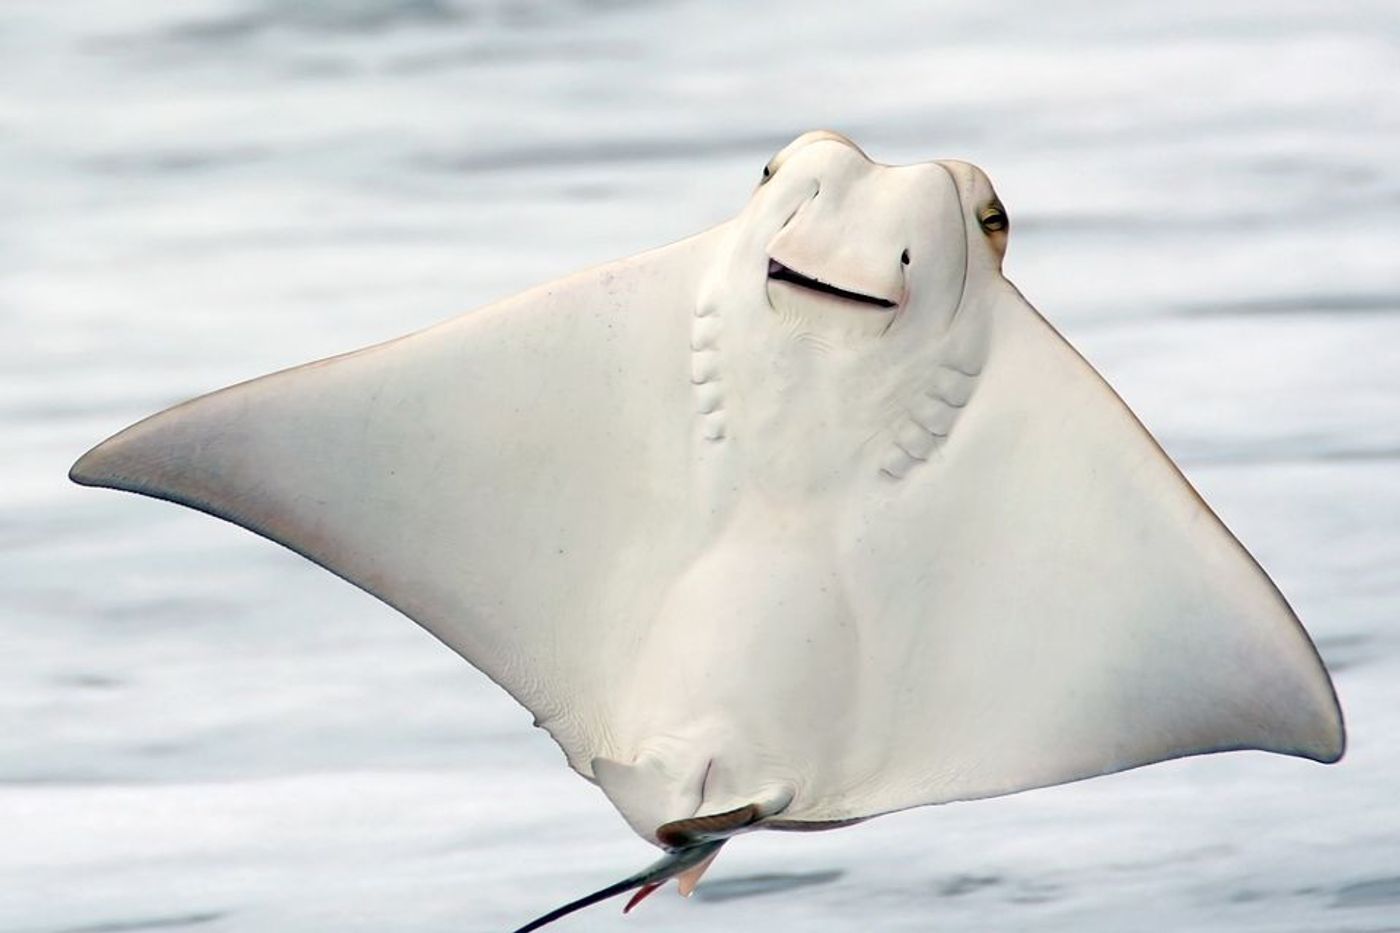 So it turns out that stingrays may actually chew their food, but not in the sense that you're used to when you think about the jaw motions you use while eating.